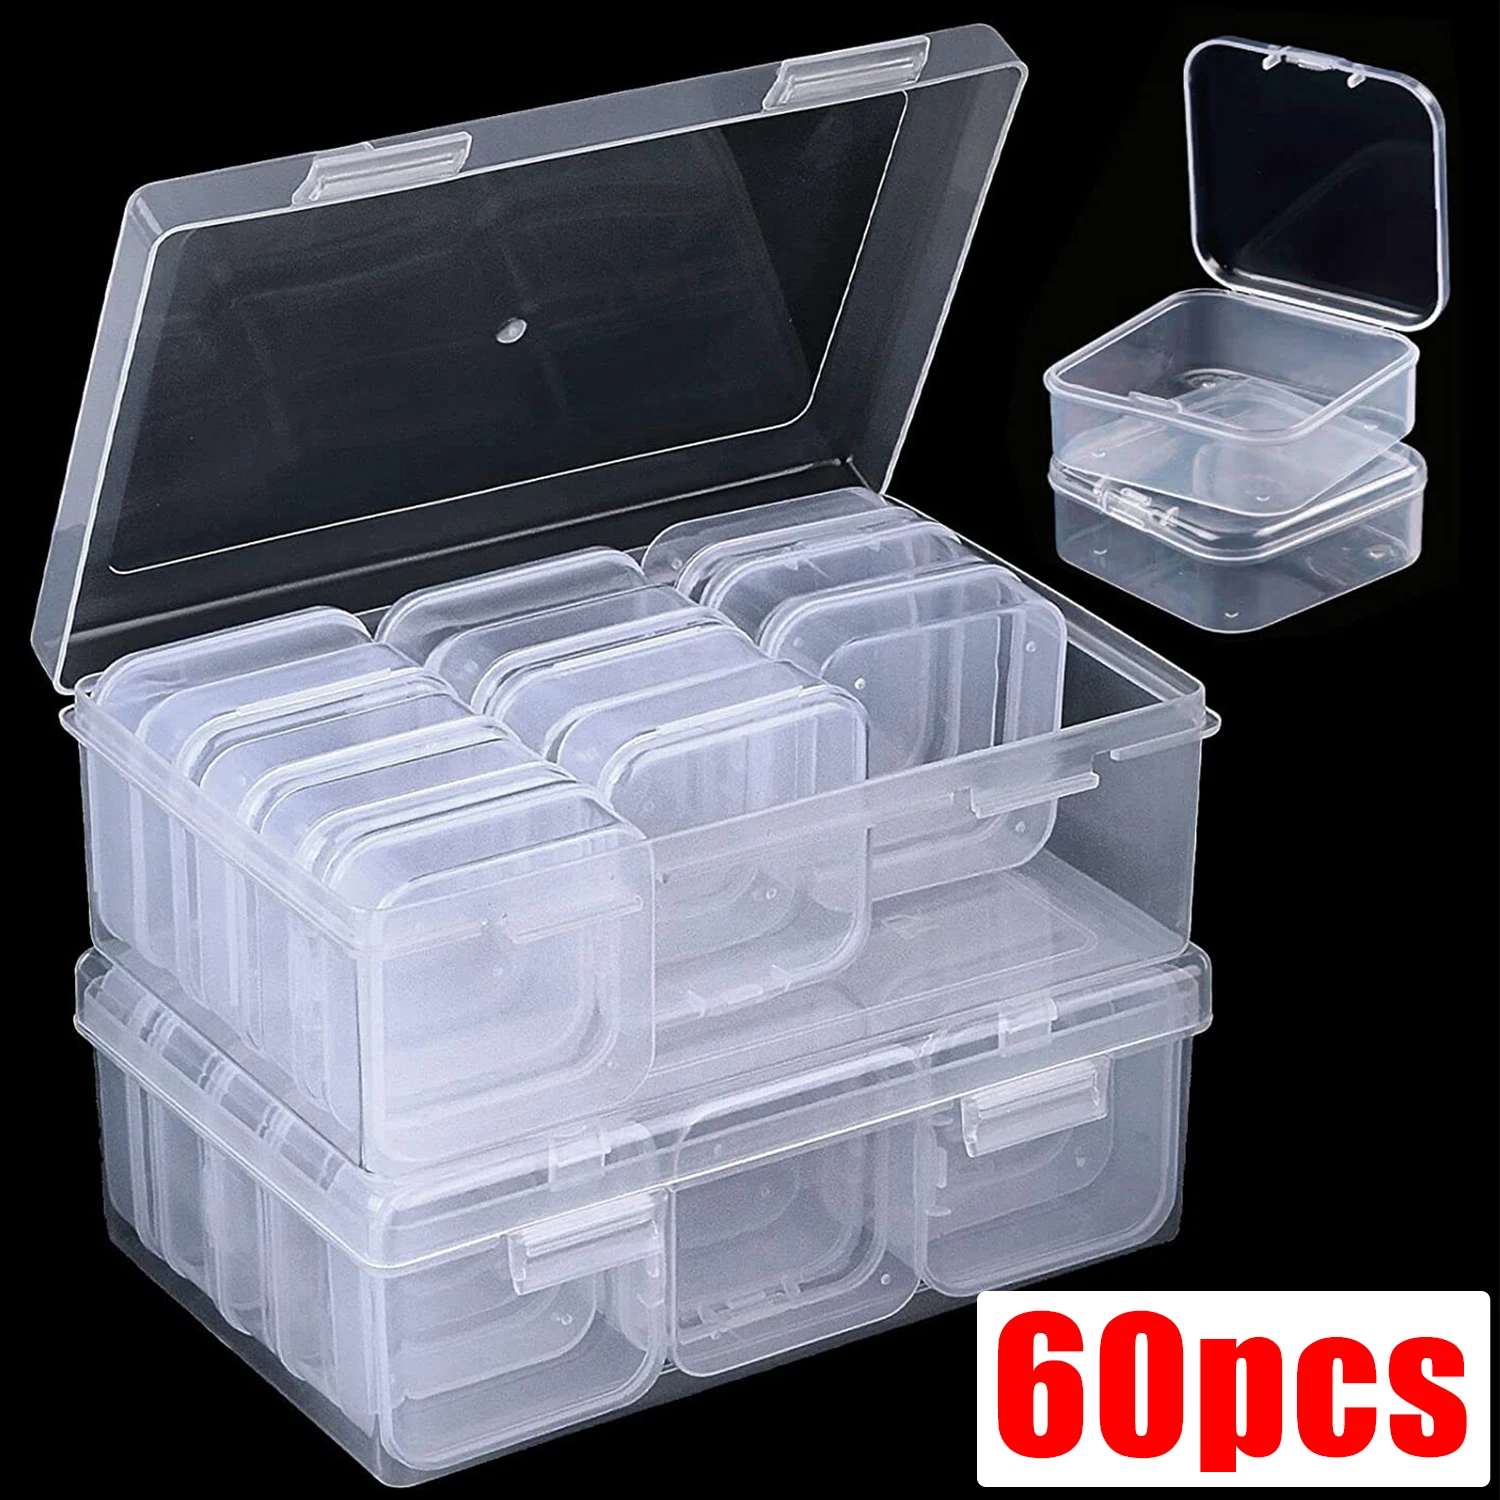 60 Packs Clear Small Plastic Containers Transparent Storage Box with Hinged Lid for Items Crafts Jewelry Package Clear Cases convenient screw lid box clear plastic storage container jewelry storage box powder storage box for beads and small item